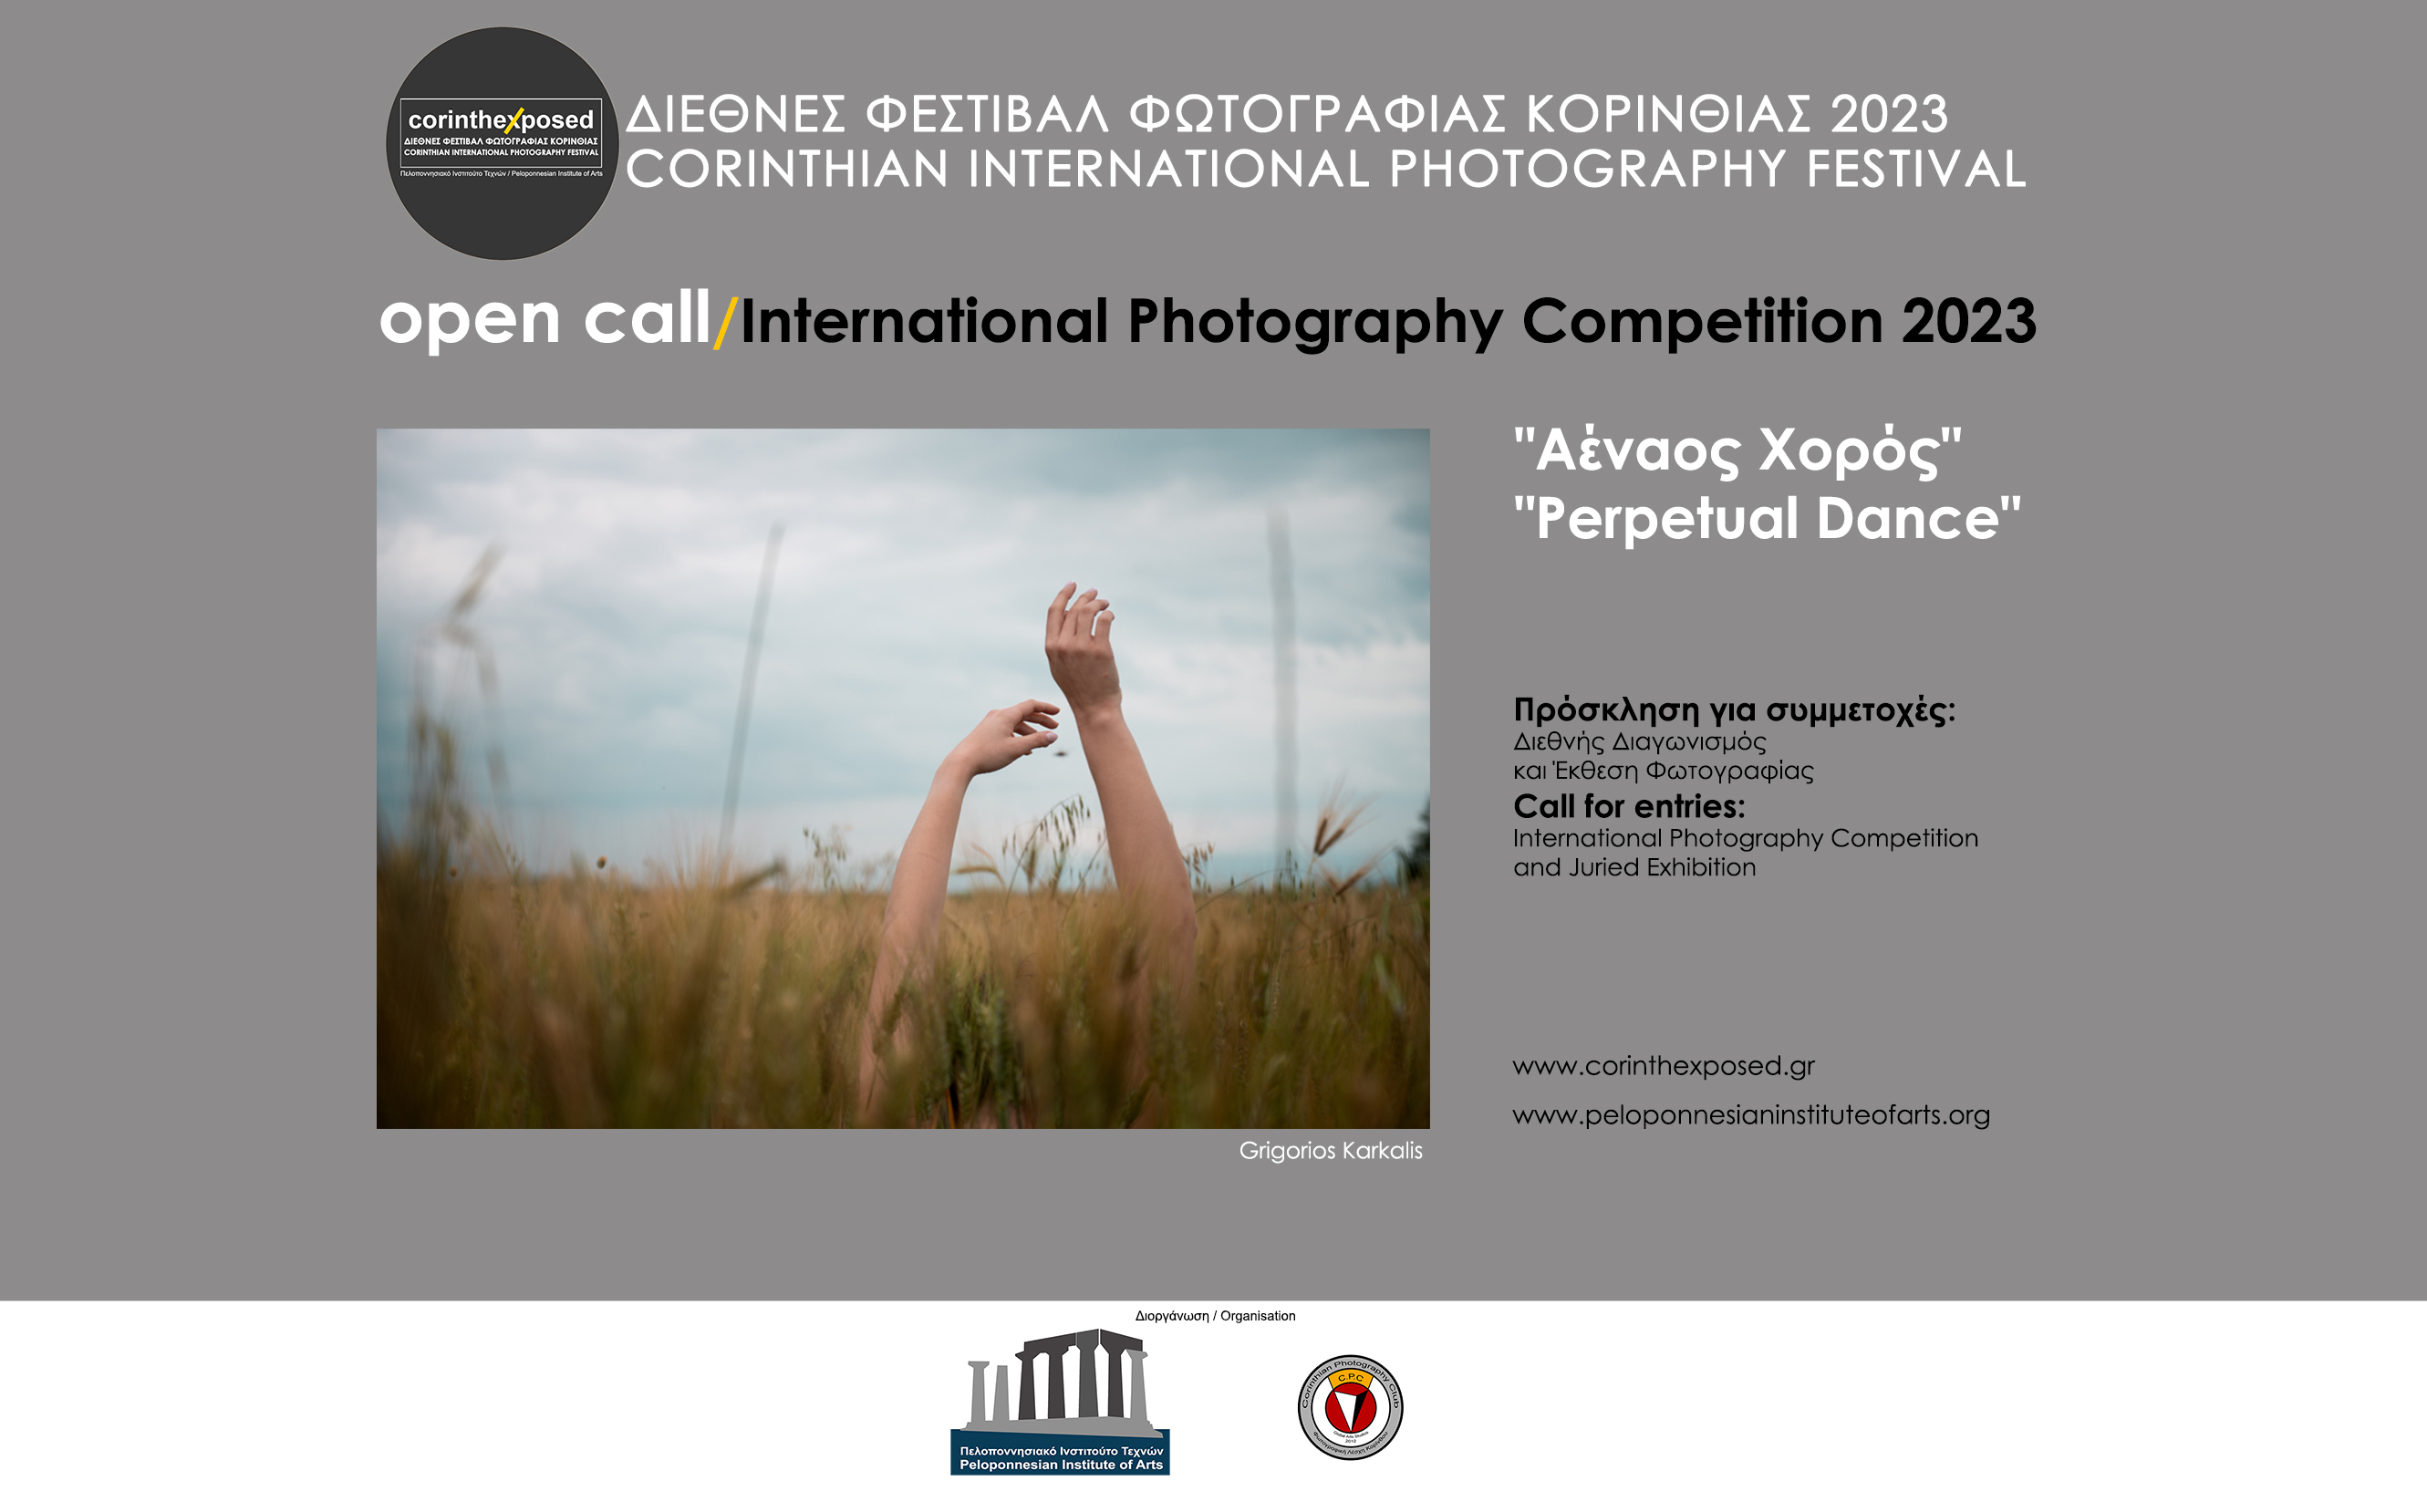 International Photography Competition and Juried Exhibition "Perpetual Dance"